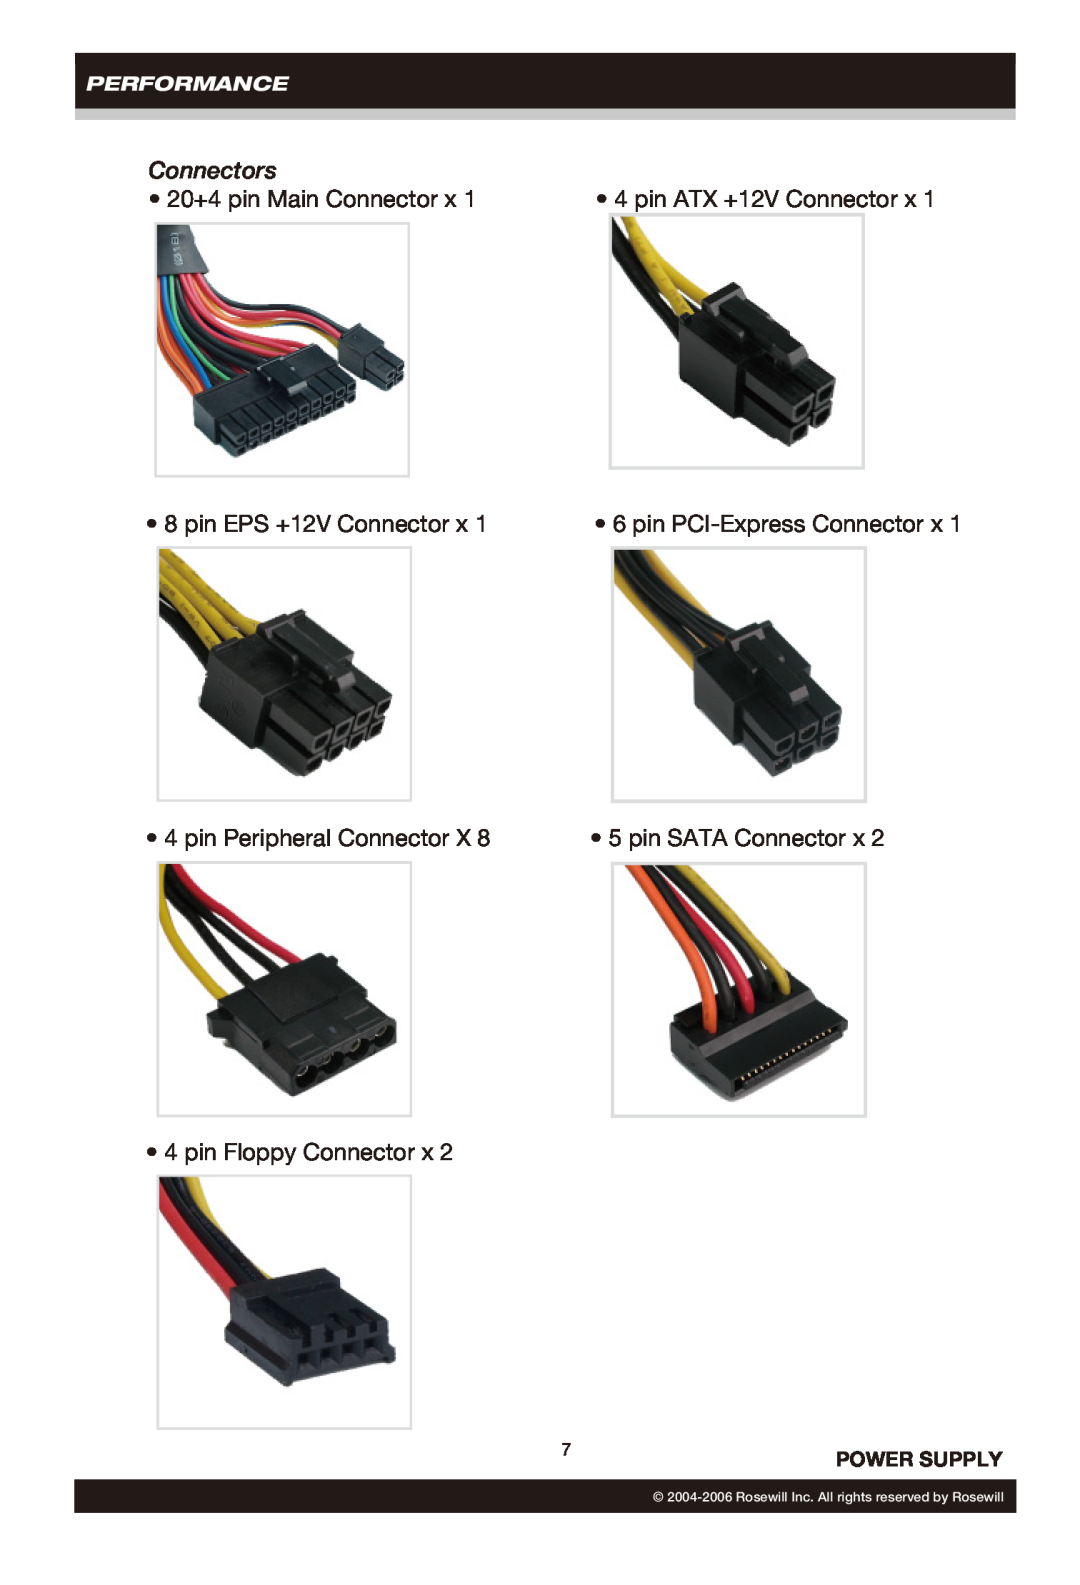 Rosewill RP550-2-S Connectors, 20+4 pin Main Connector x, pin ATX +12V Connector x, pin SATA Connector, Performance 